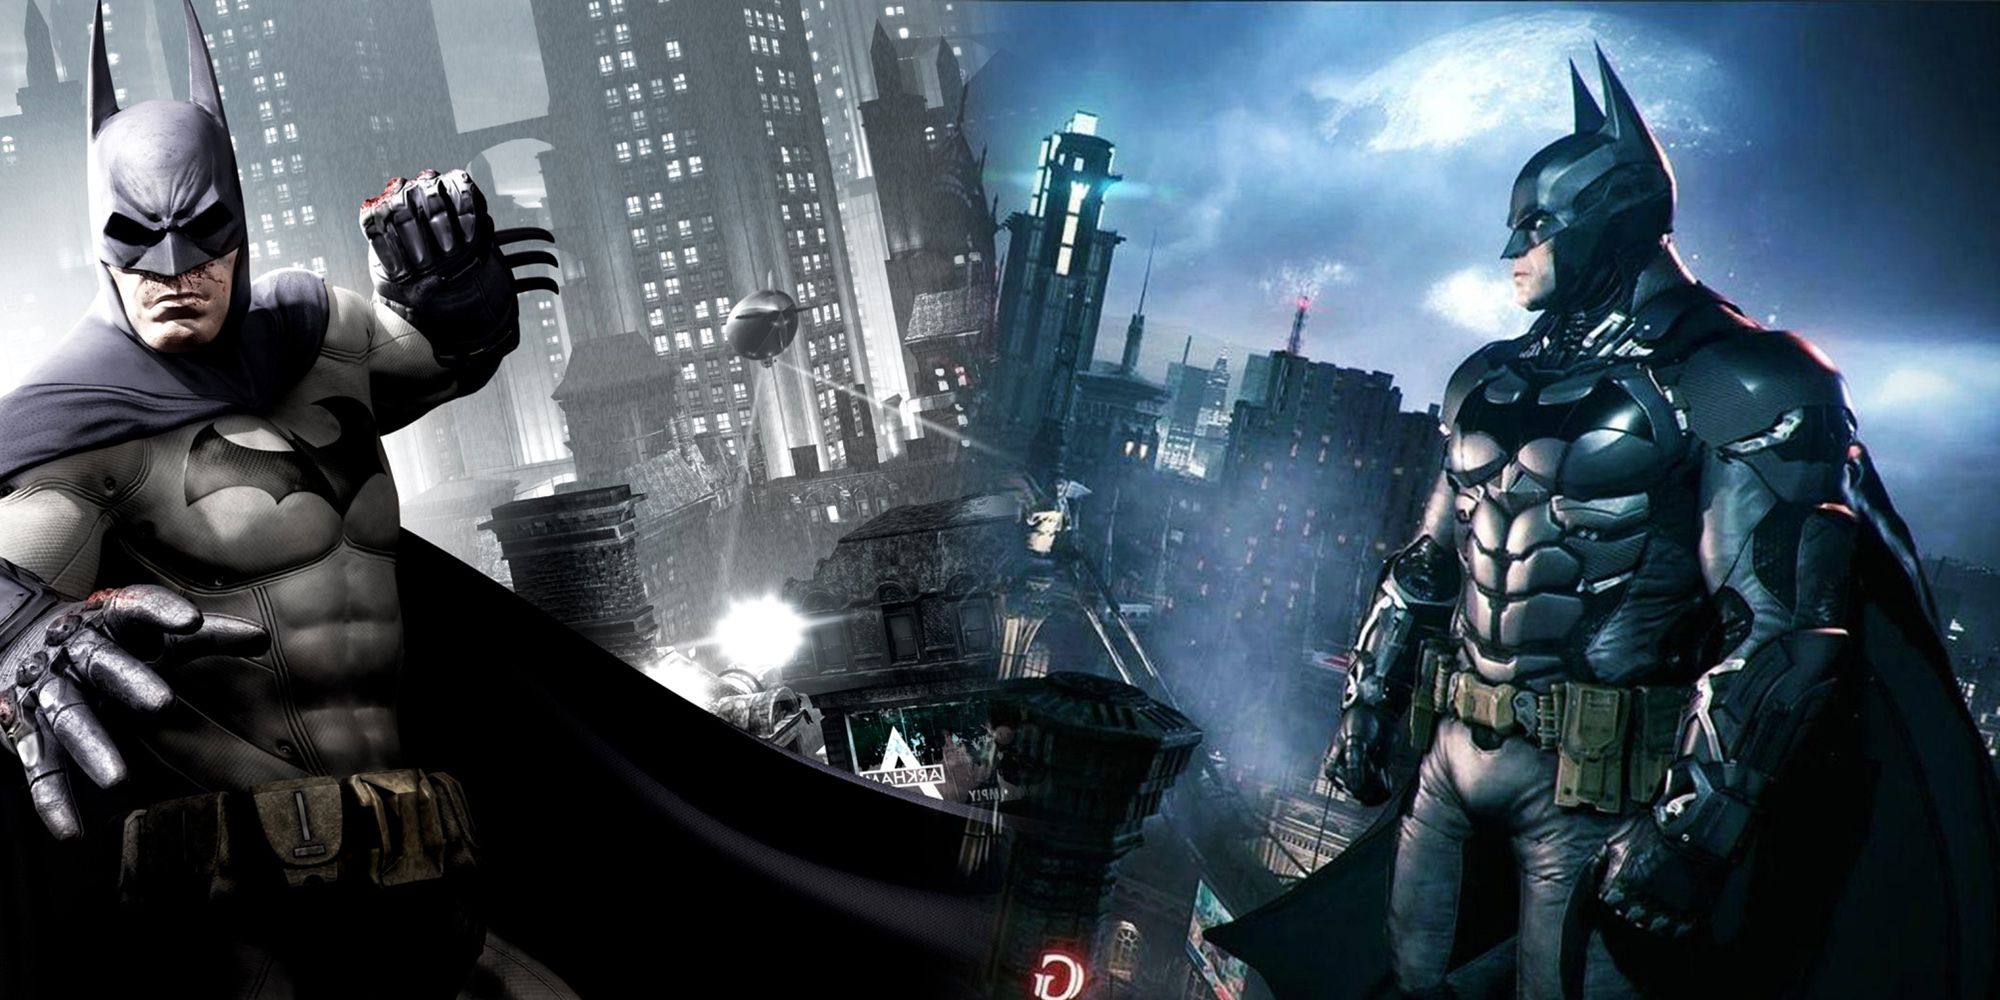 Cover-Art-From-Batman-Arkham-City-And-Arkham-Knight-Side-By-Side-1